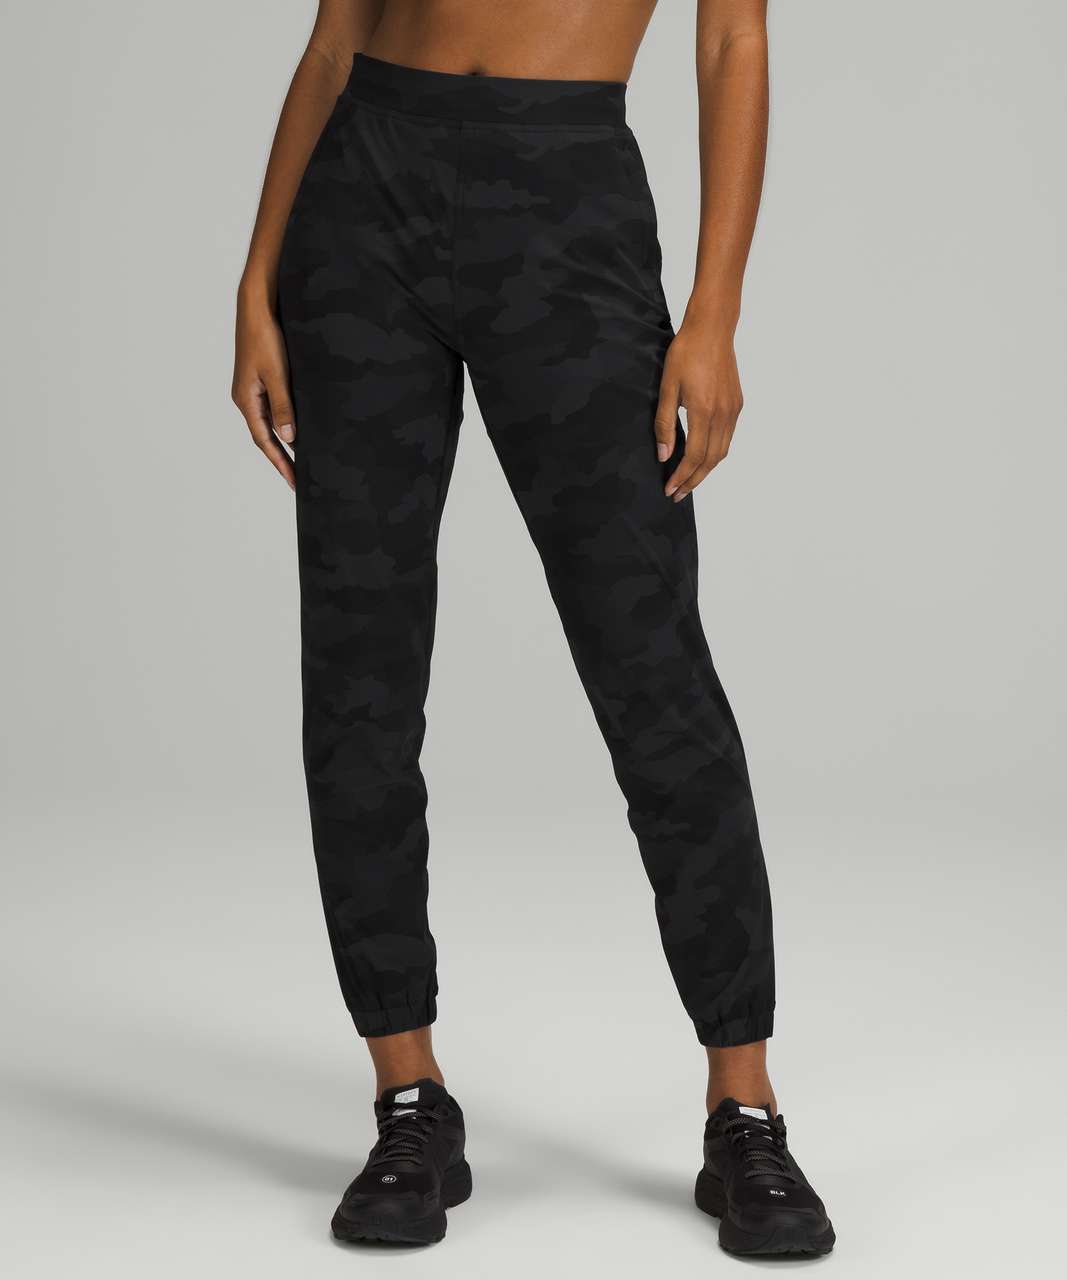 Lululemon Adapted State Jogger Black Size 2 - $64 (50% Off Retail) - From  bella